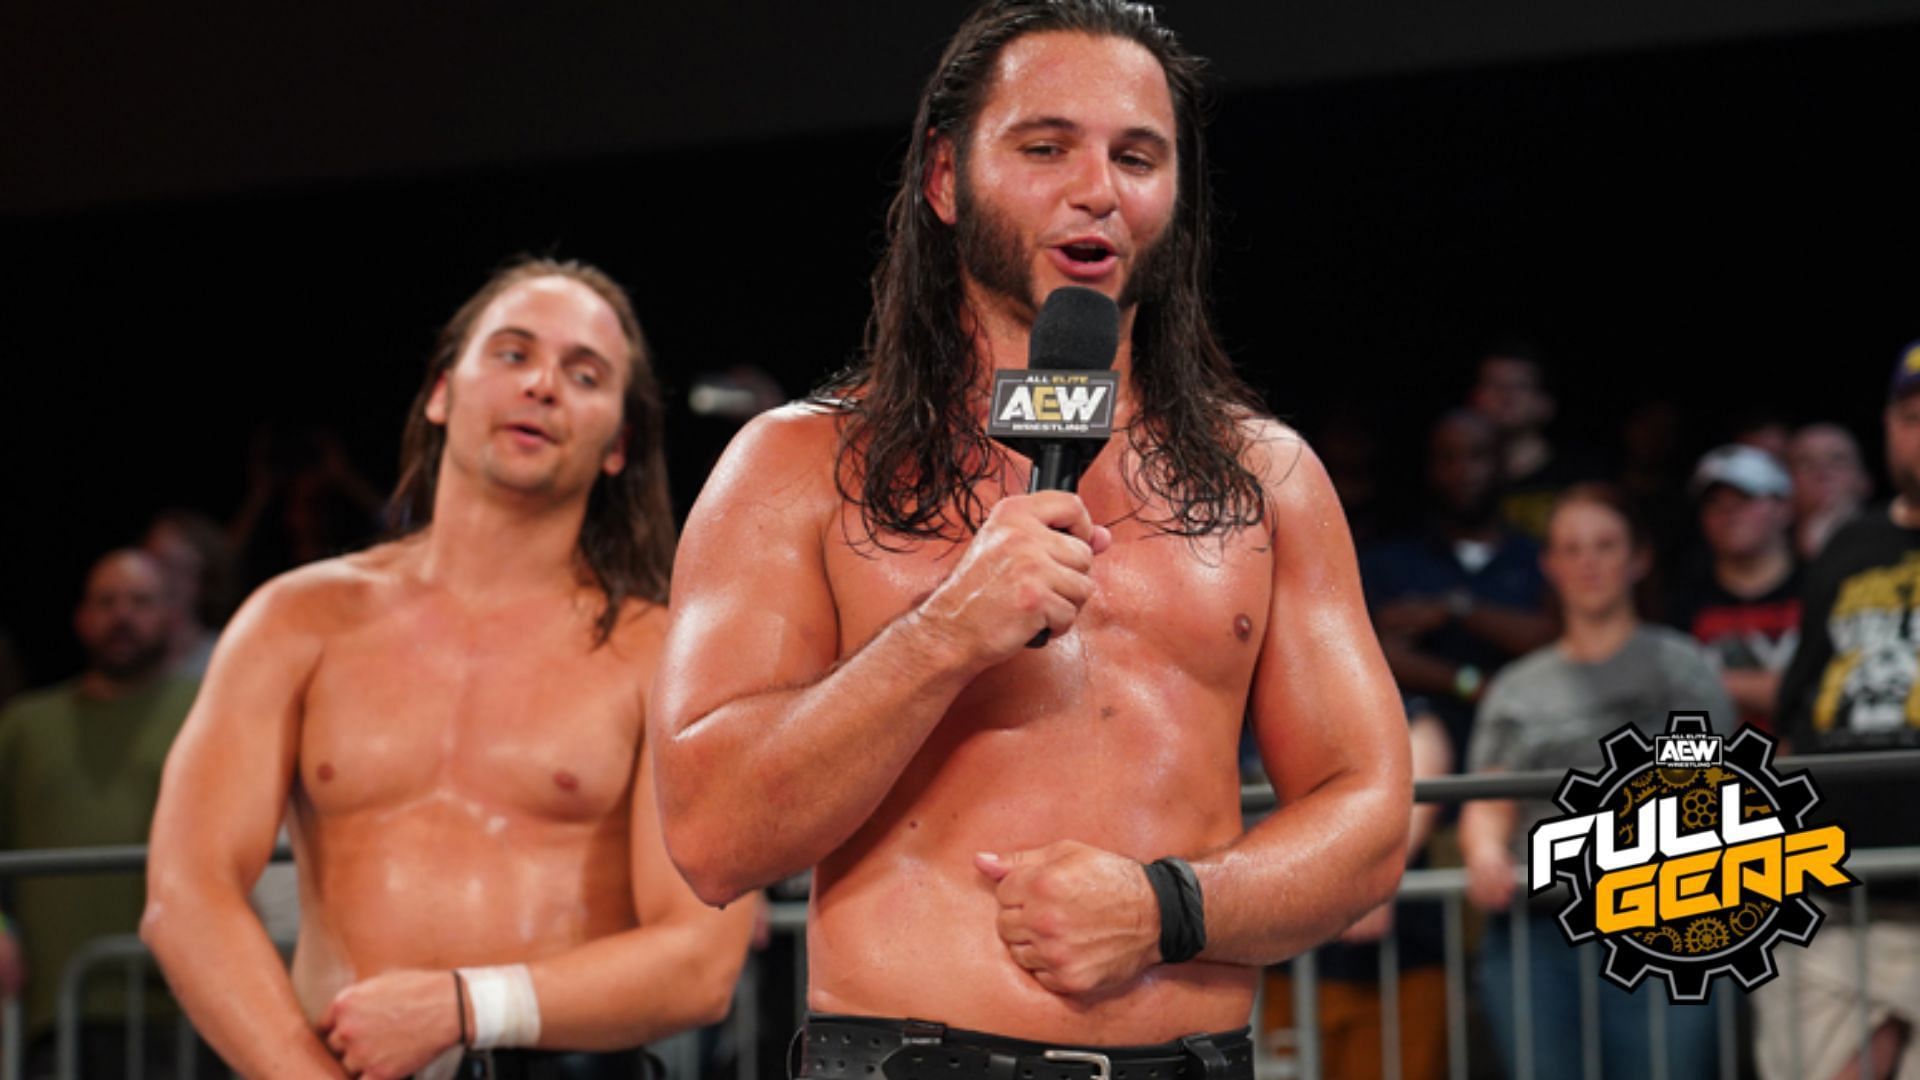 The Young Bucks are multi-time AEW World Tag Team Champions